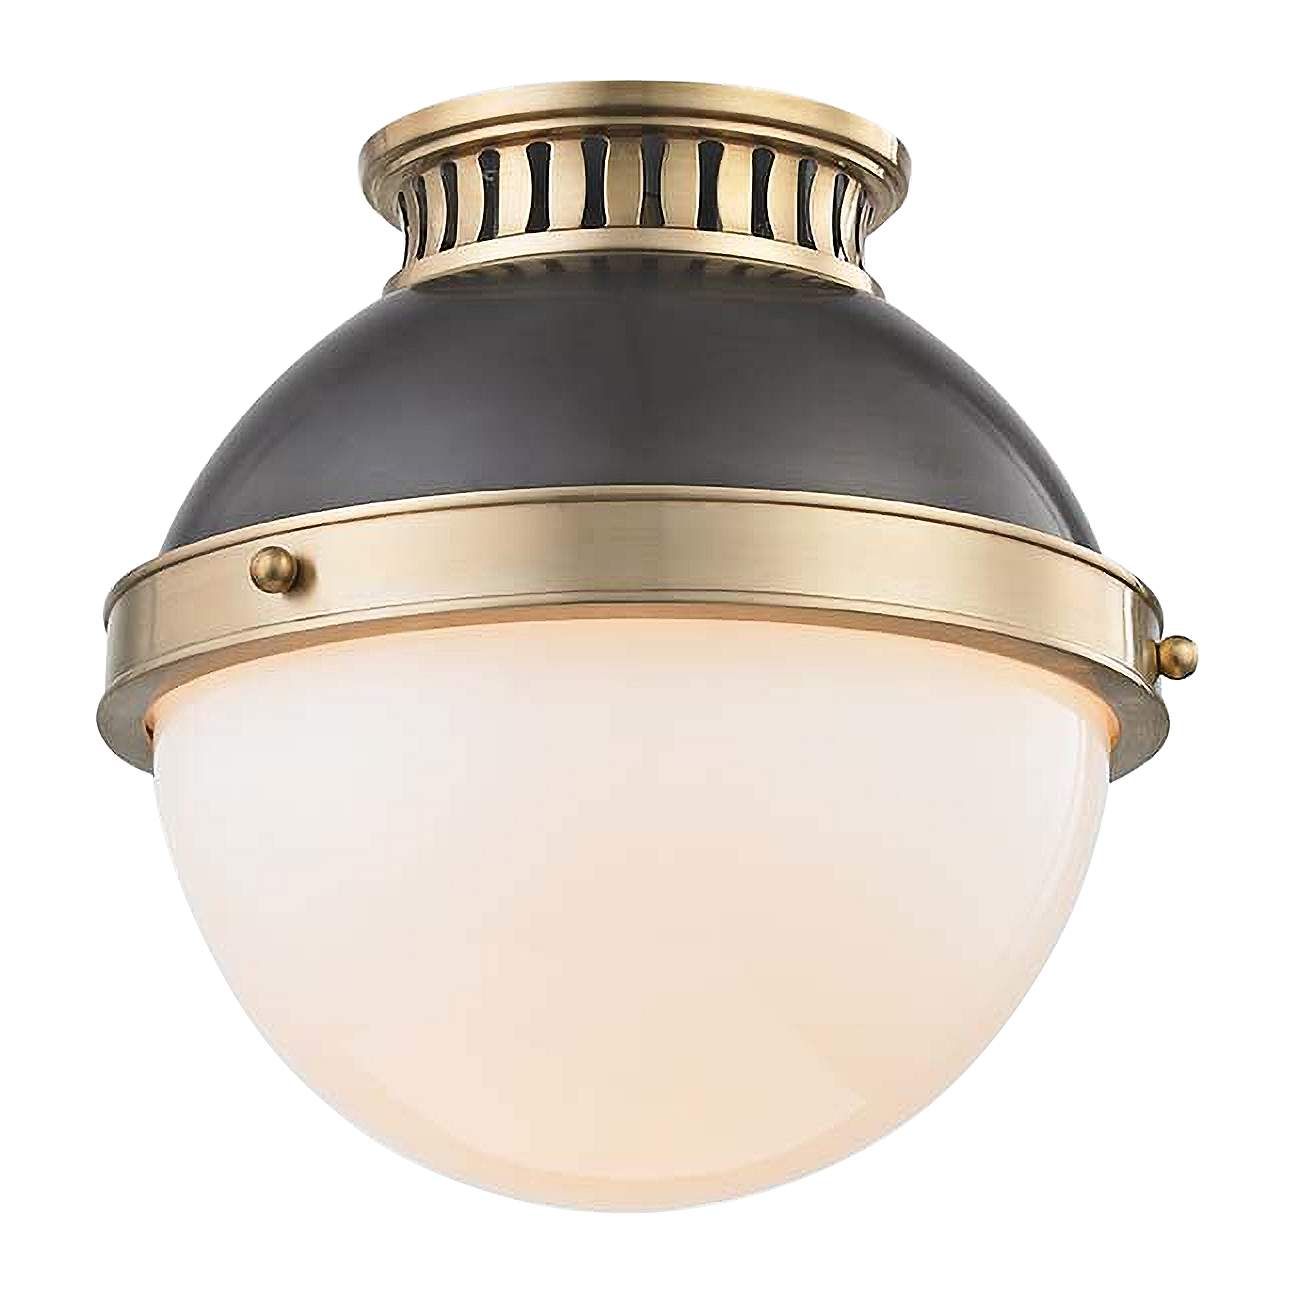 Latham 9 1/2" Wide Aged and Distressed Bronze Ceiling Light - #73E60 | Lamps Plus | Lamps Plus